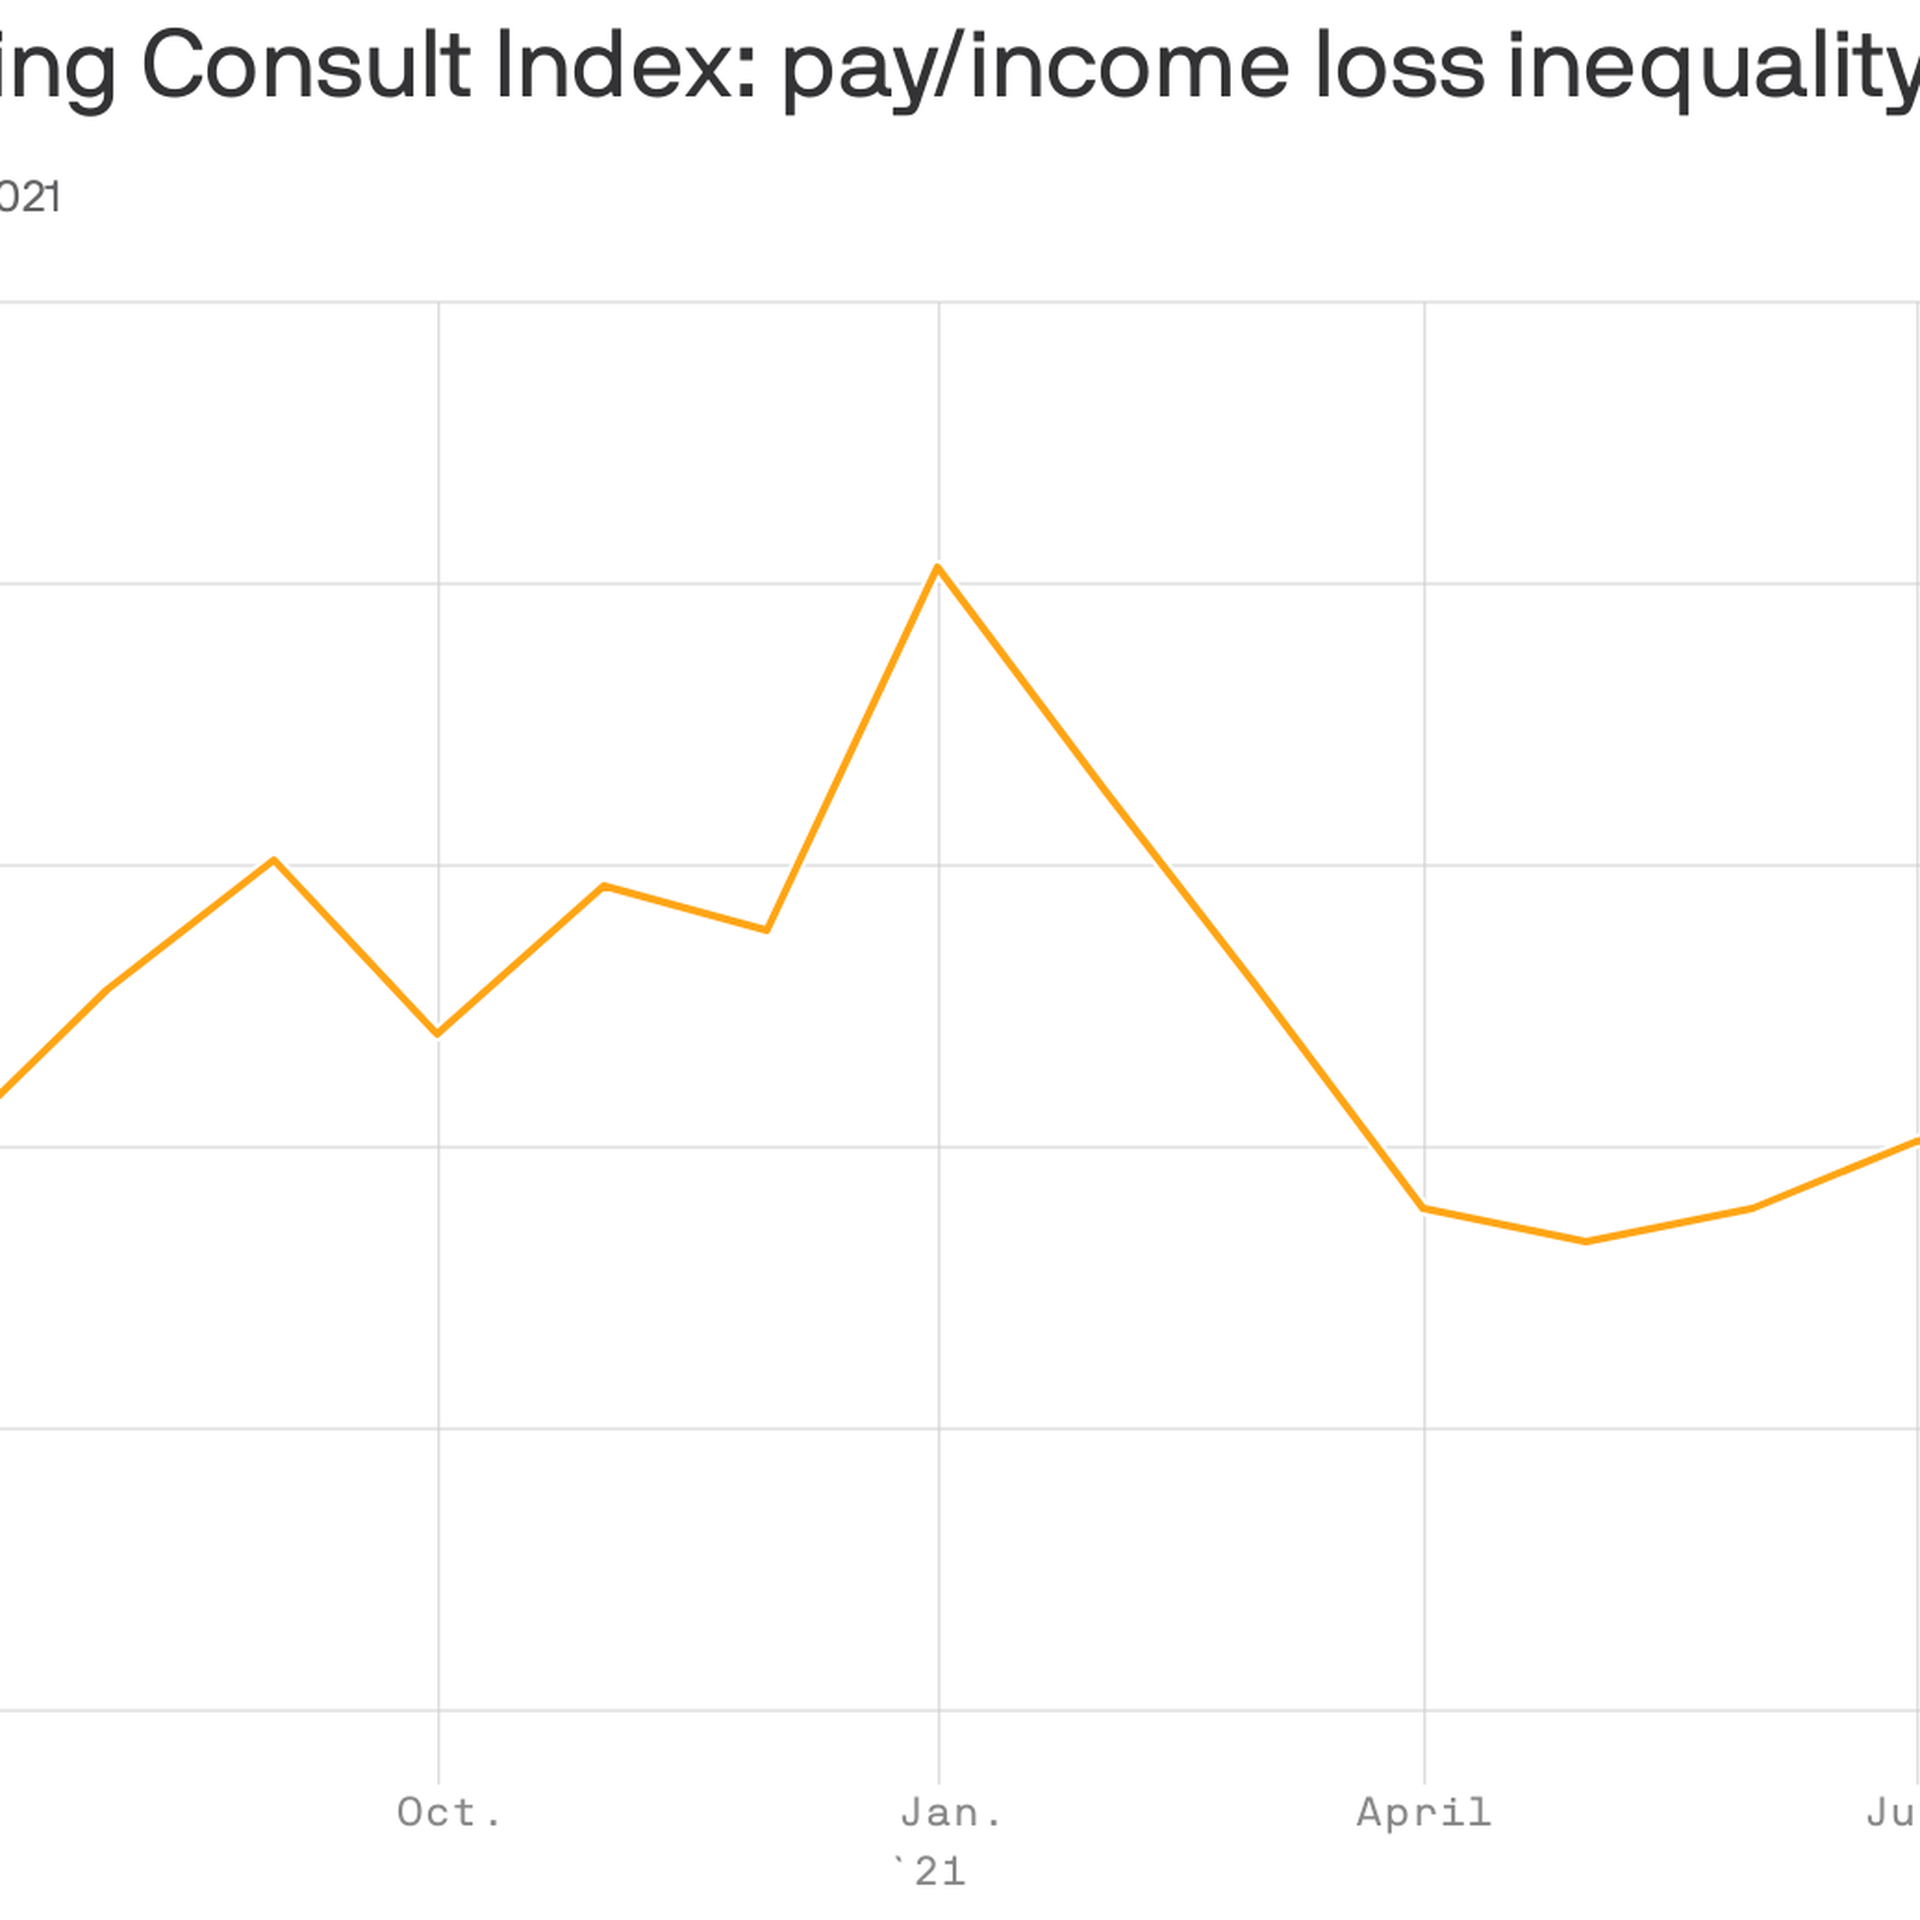 A chart showing pay/income loss inequality